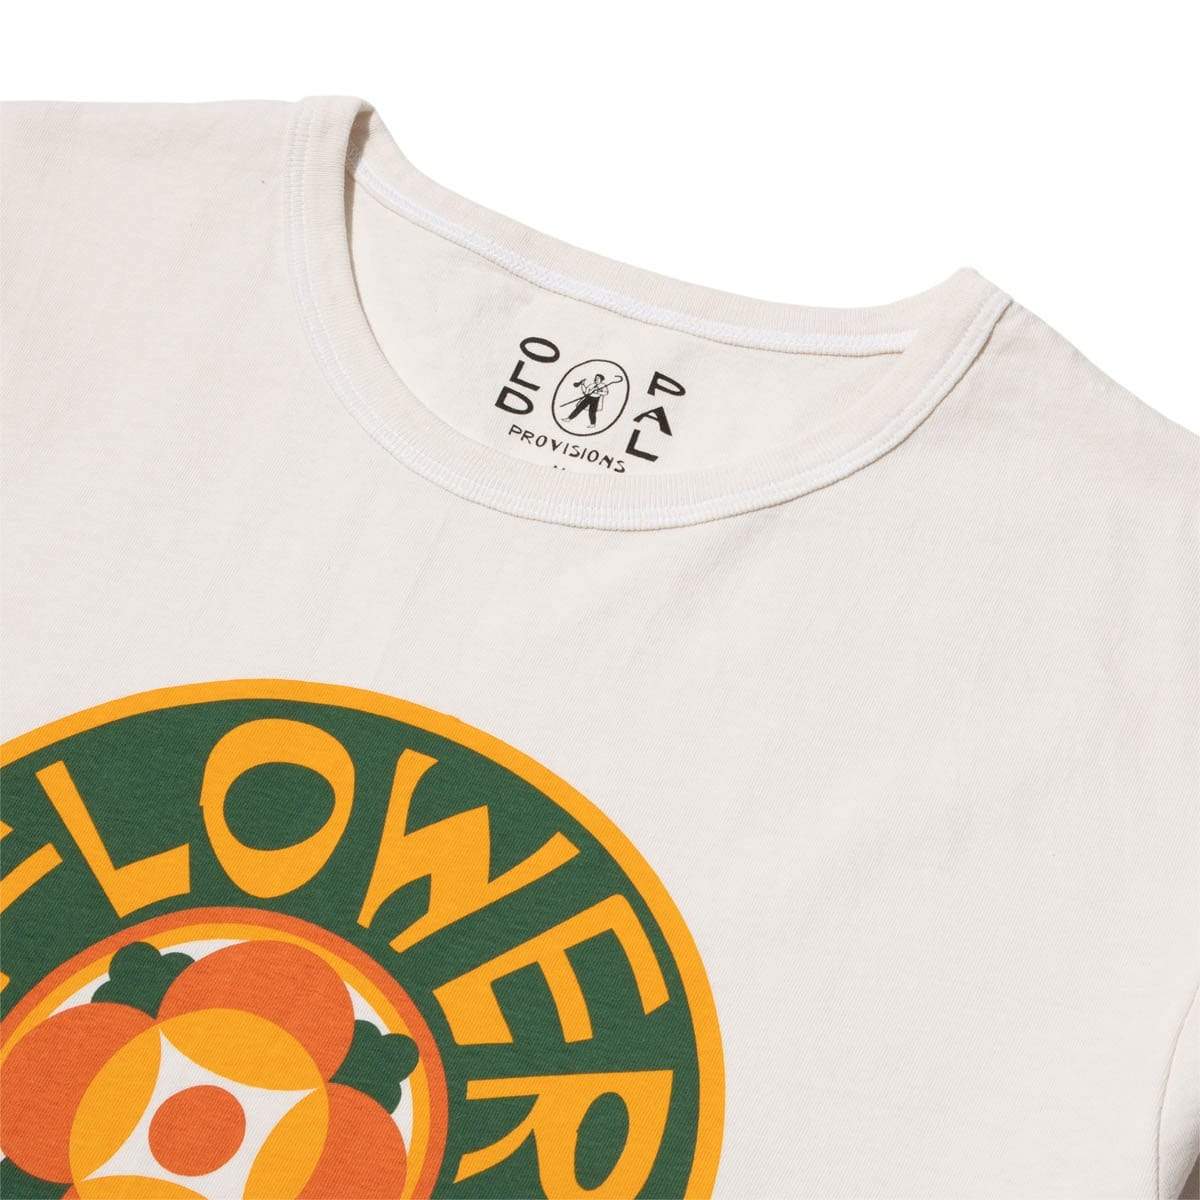 Old Pal Provisions T-Shirts FLOWER POWER T-SHIRT